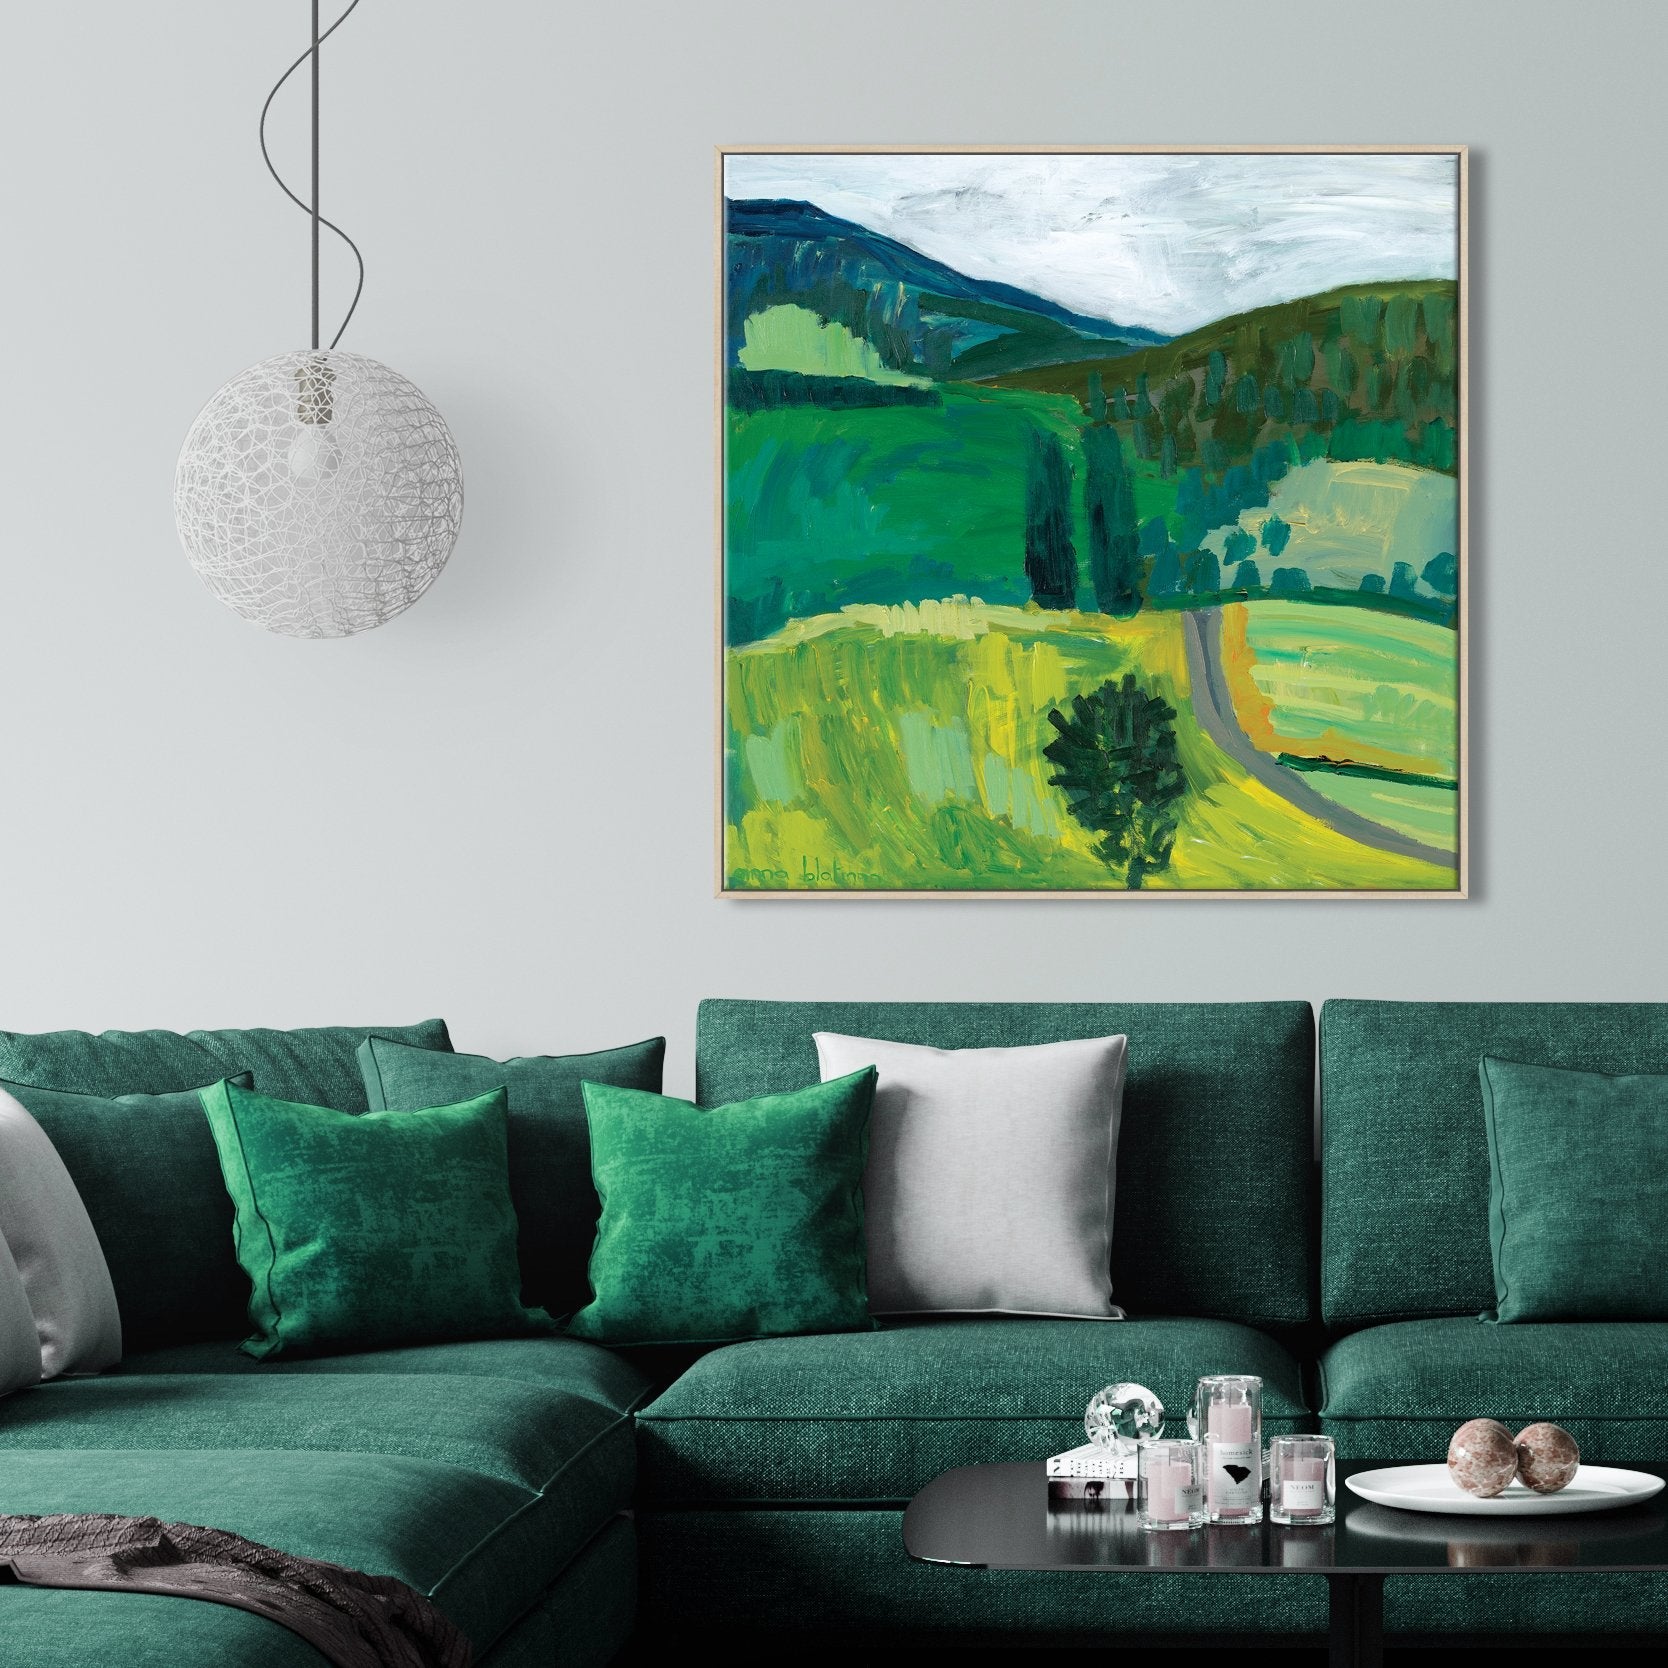 Bright - Gallery Wrapped Canvas